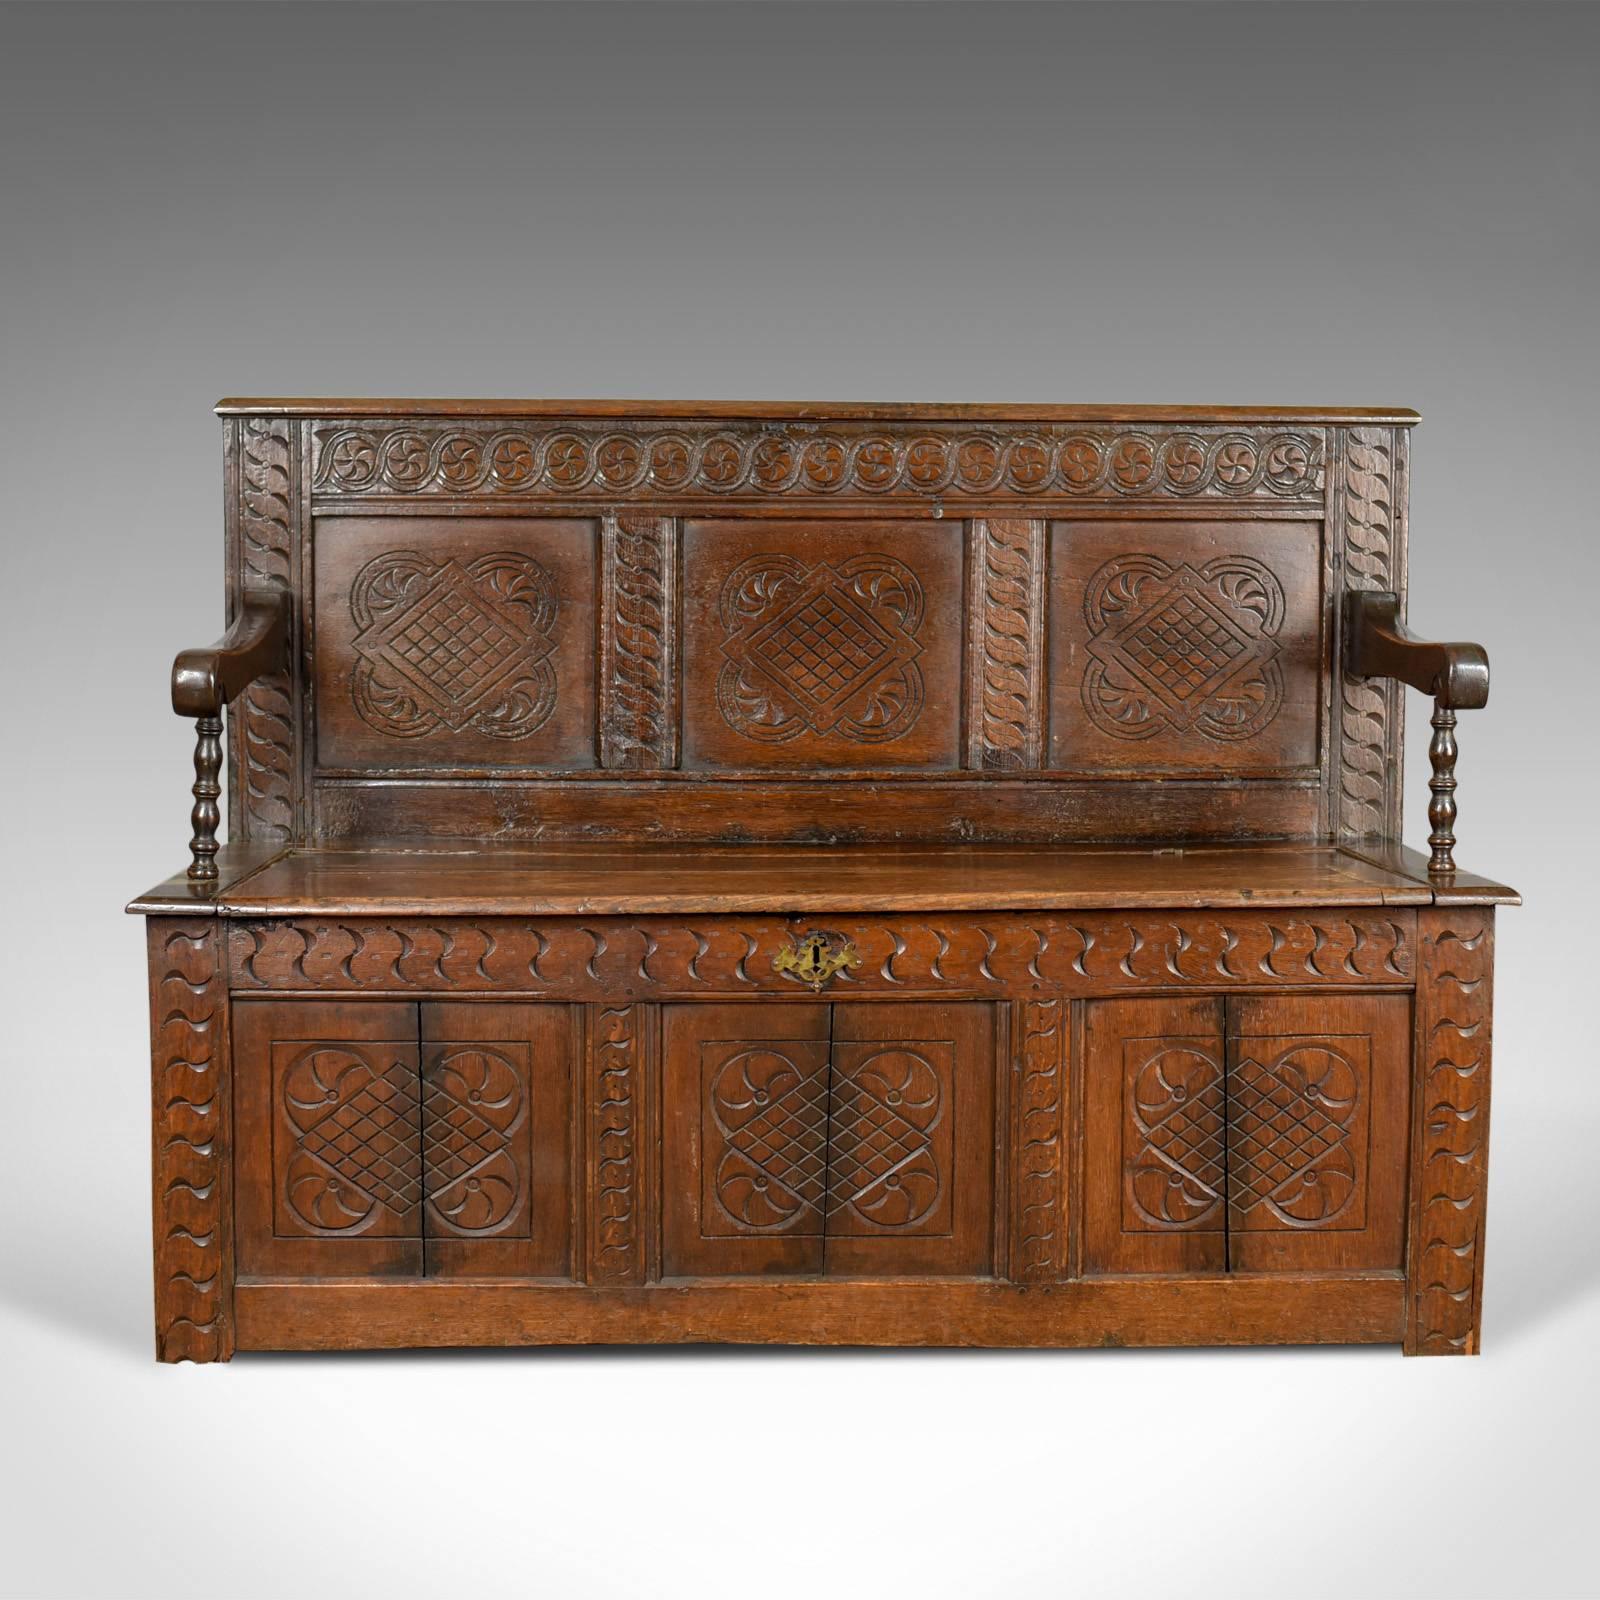 This is an antique coffer settle, an English oak hall bench seat dating to the early 18th century circa 1700 and later.

Good color in the lustrous wax polished finish
Carved interest with a desirable aged patina
Of quality pegged and panelled